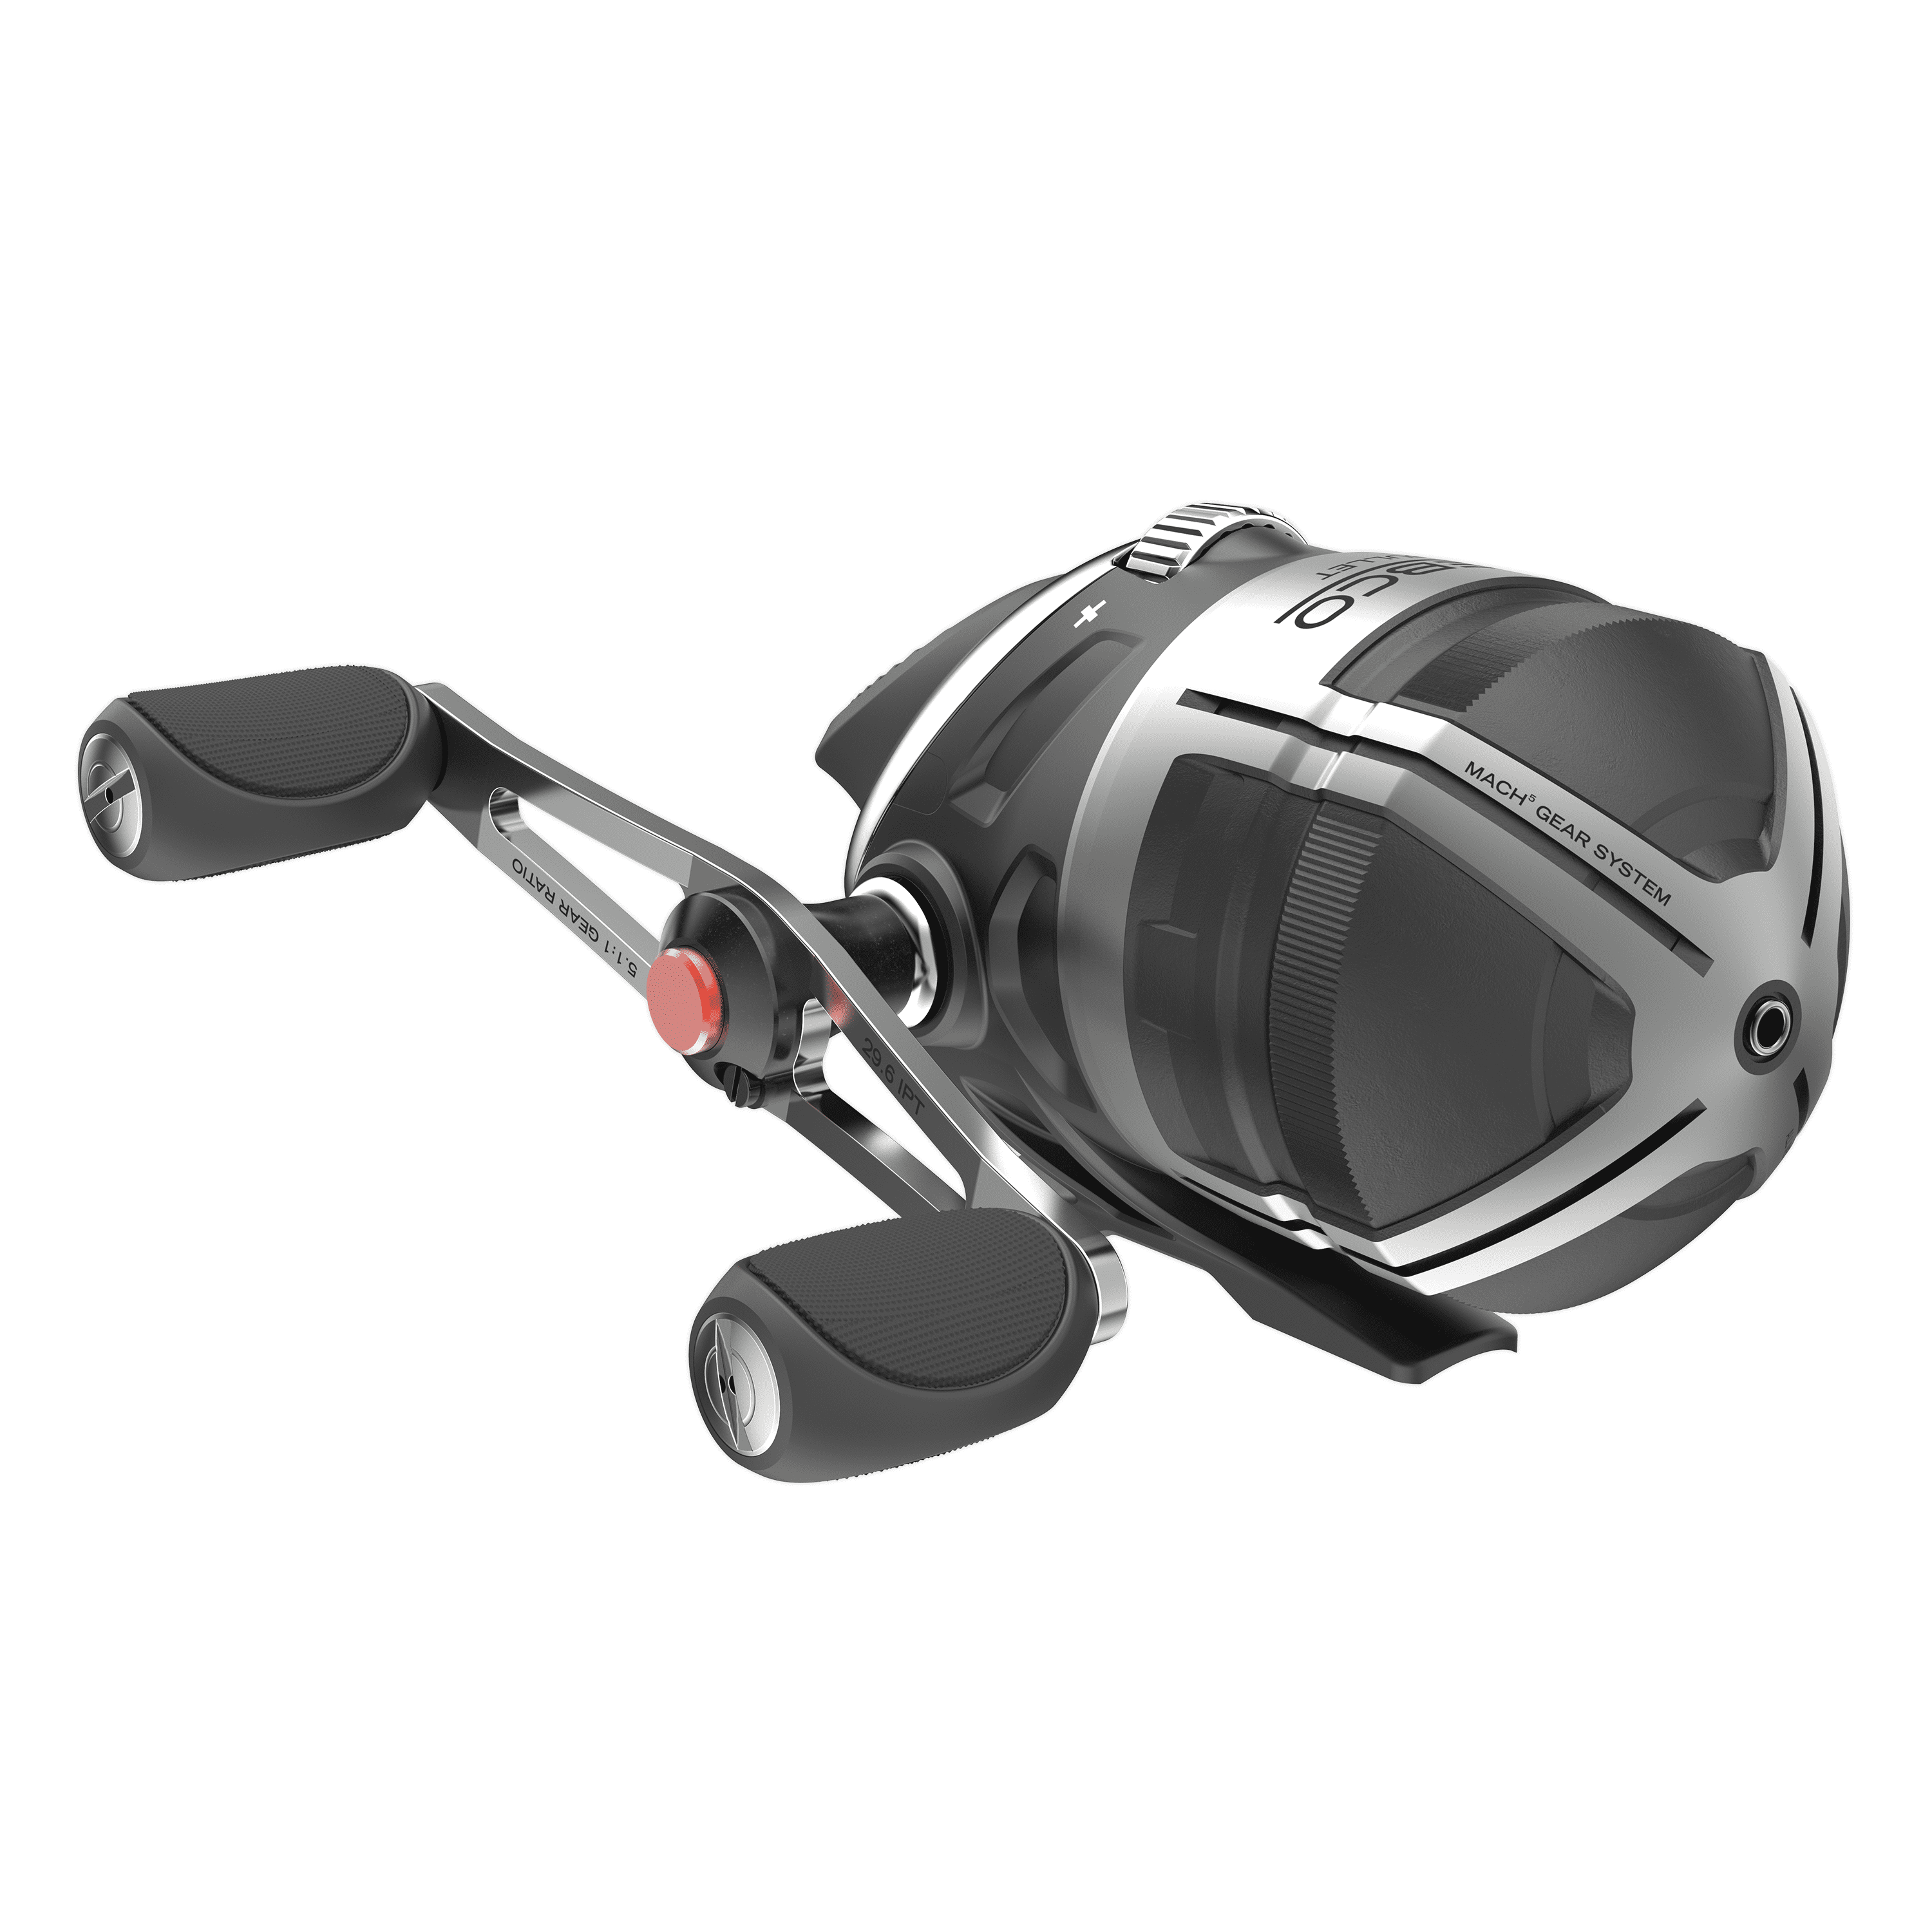 Zebco Bullet Spincast Fishing Reel 8+1 Ball Bearings with An Ultra Smooth 5.1:1 Gear Ratio